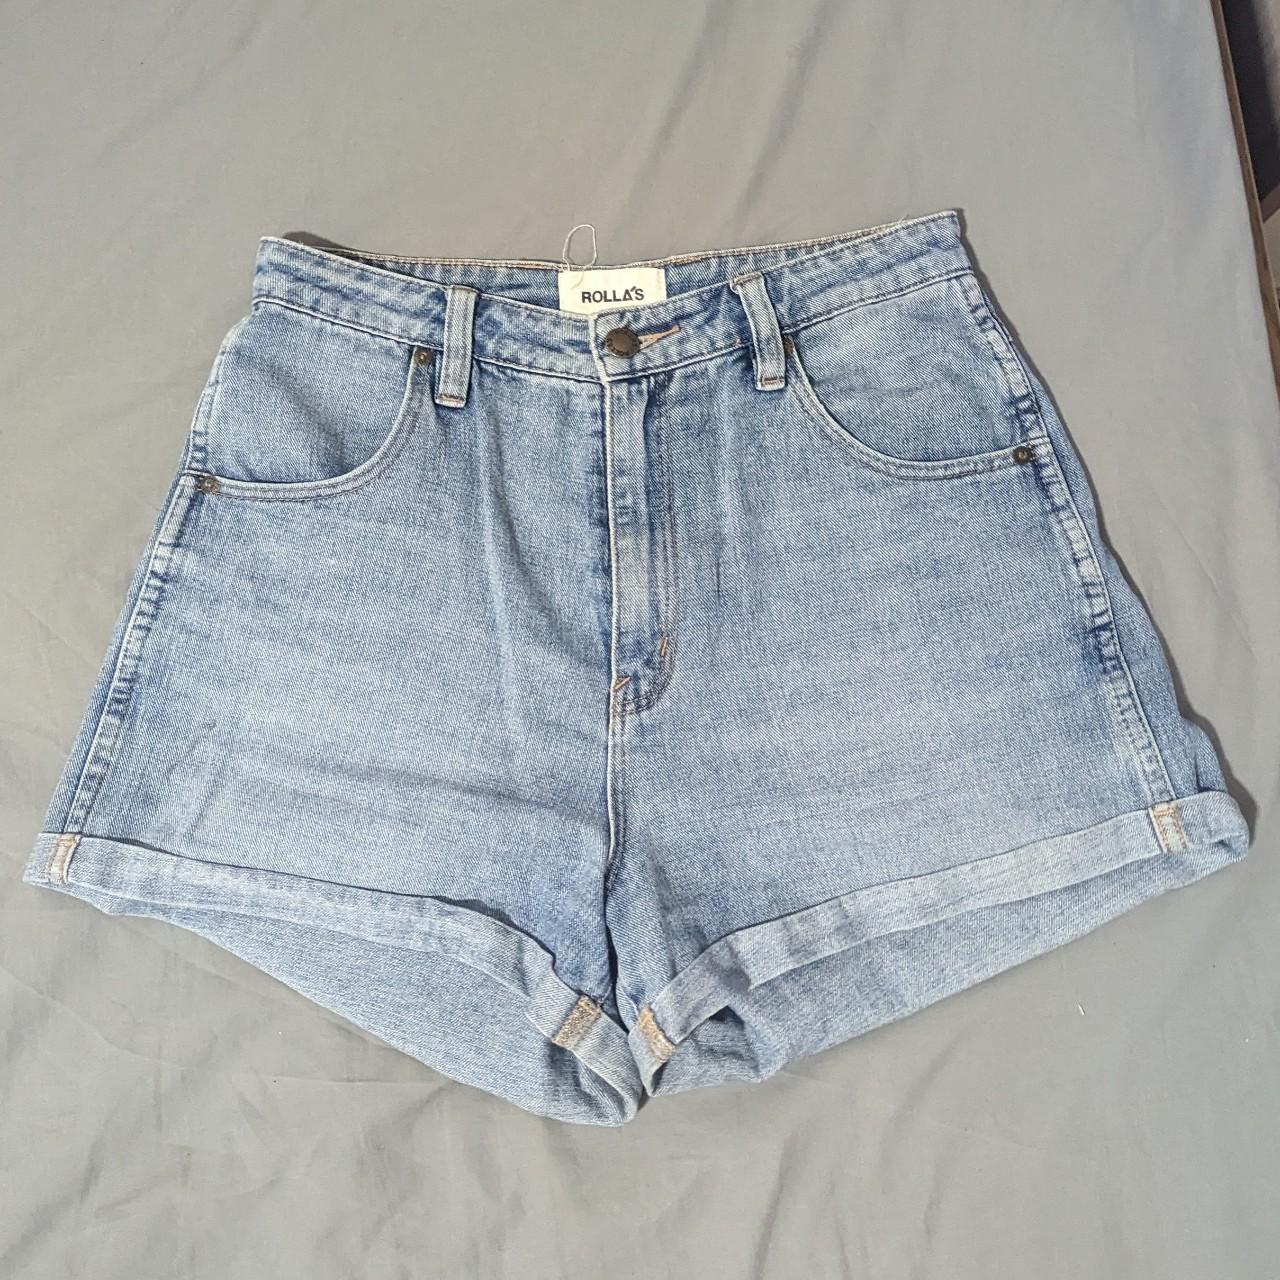 High waisted relaxed fit Size 9/ 27